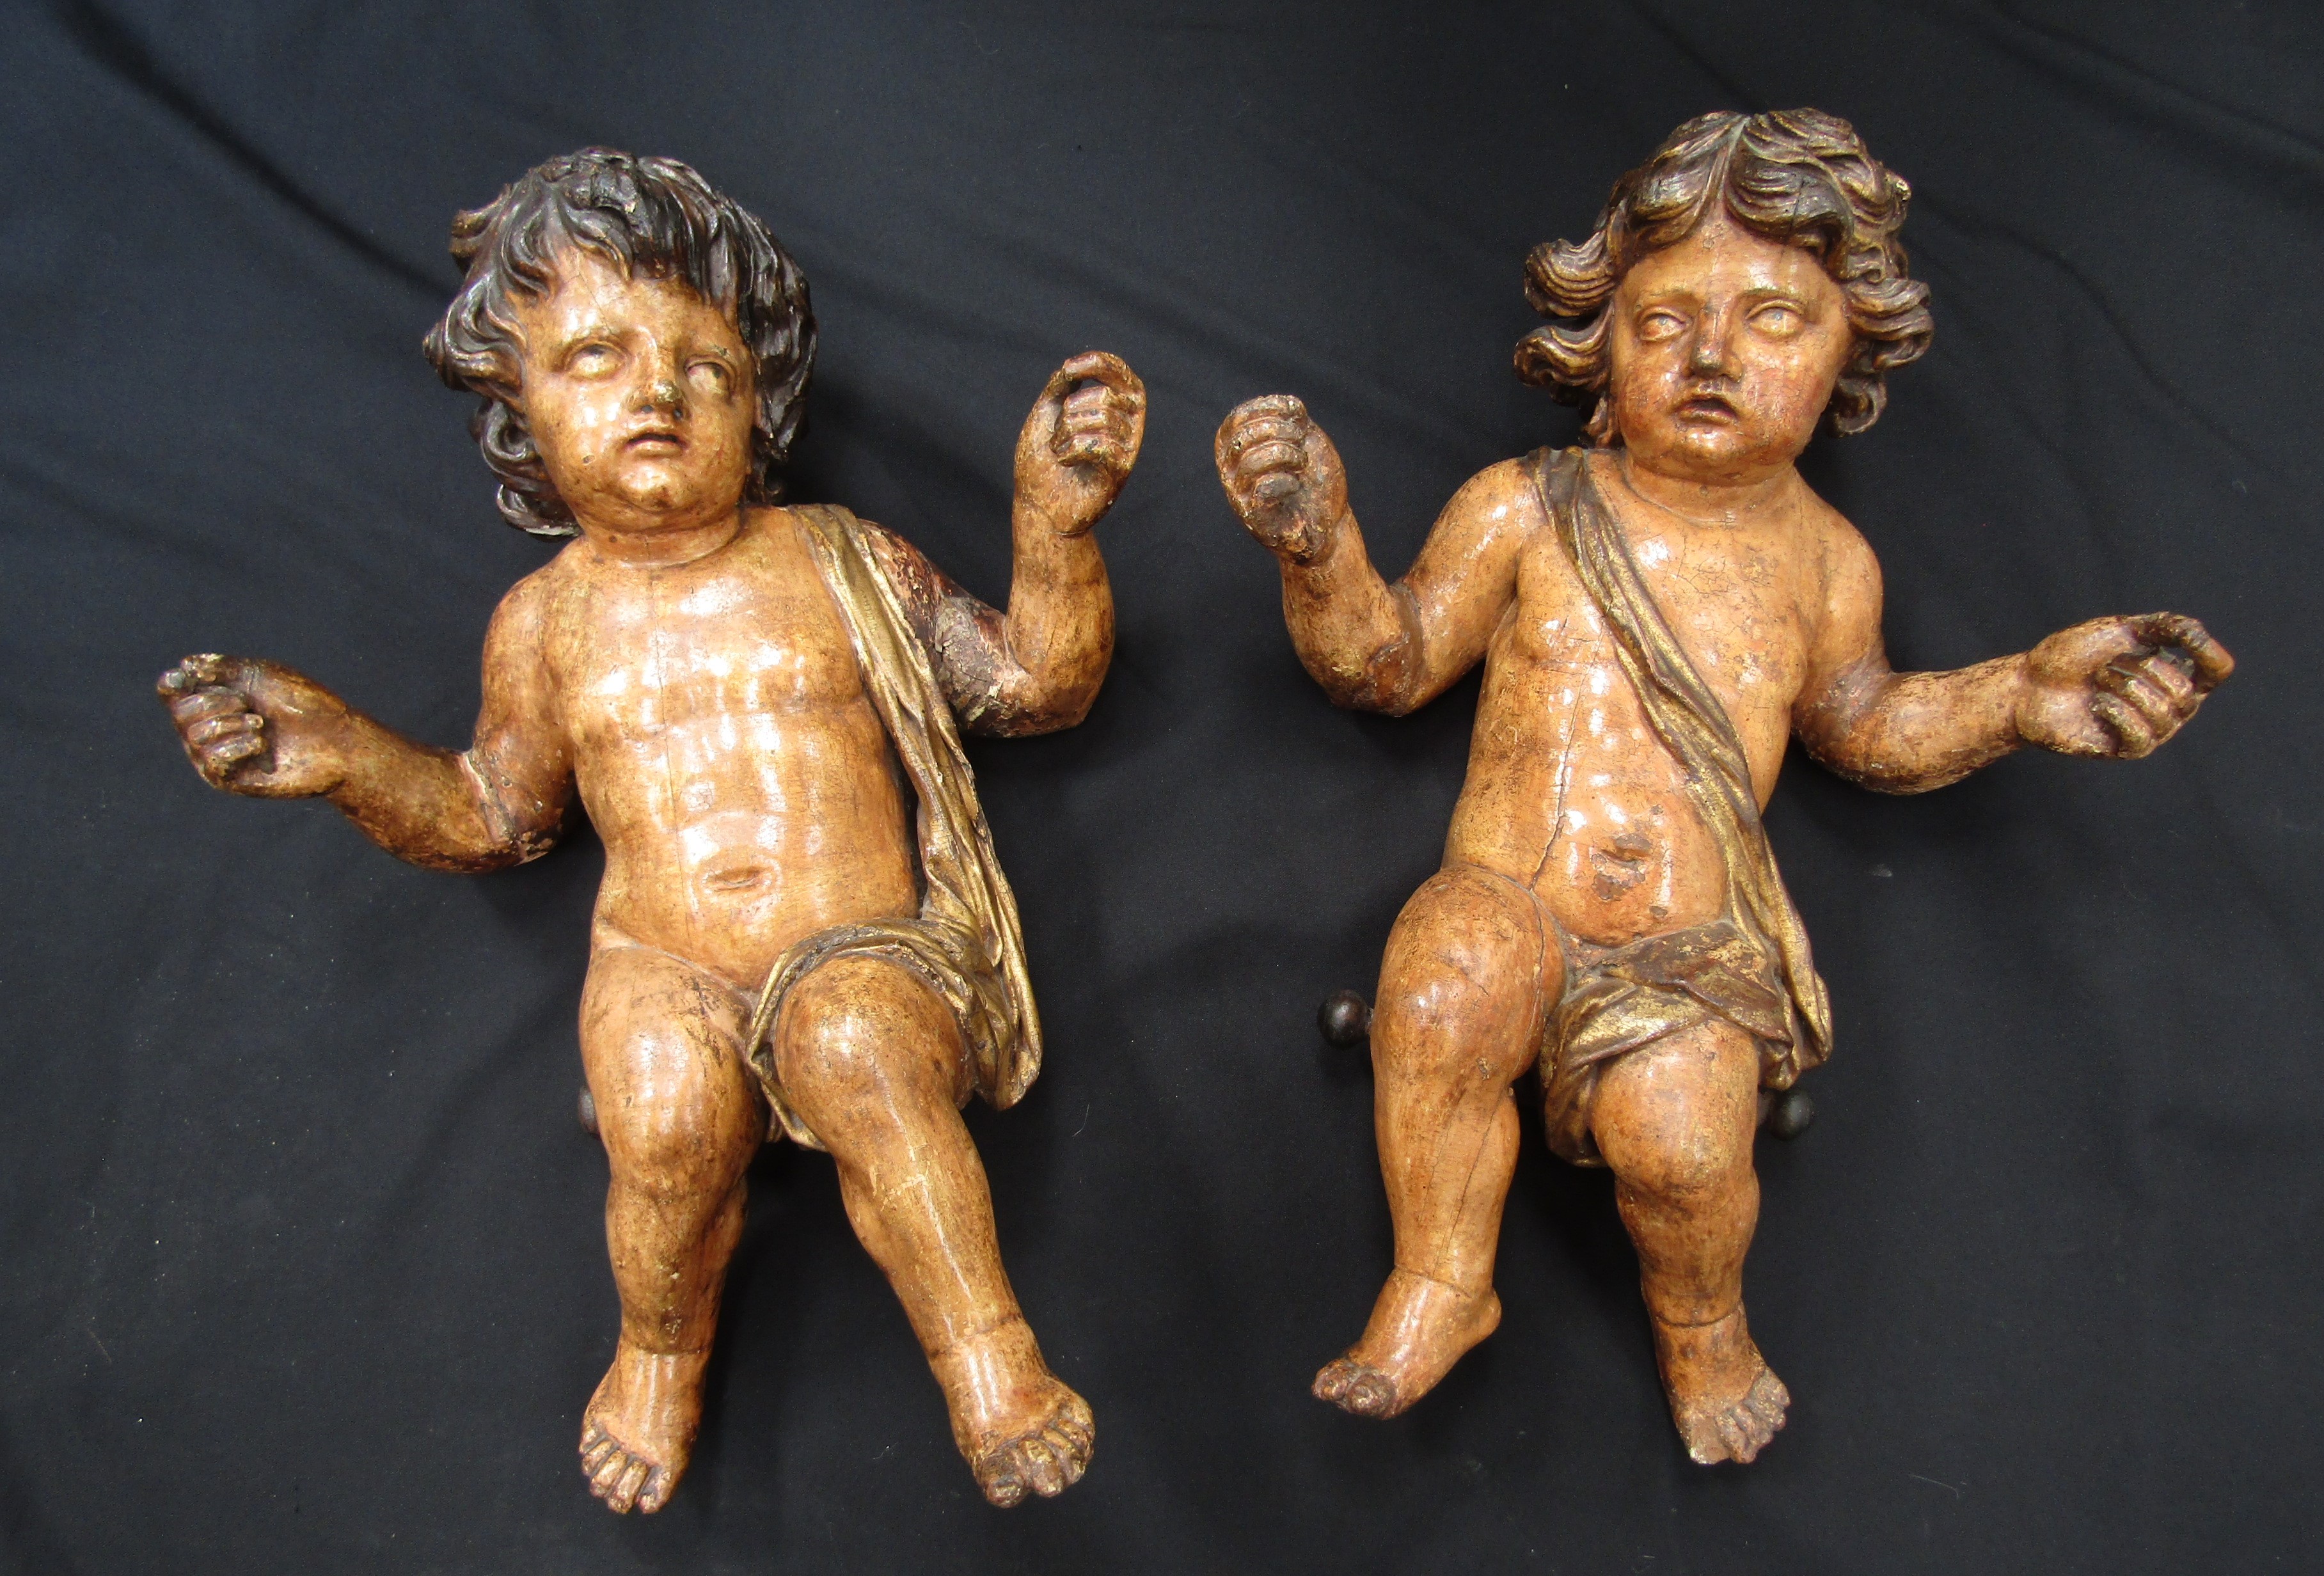 A pair of 17th Century putti, purchased in Brittany France